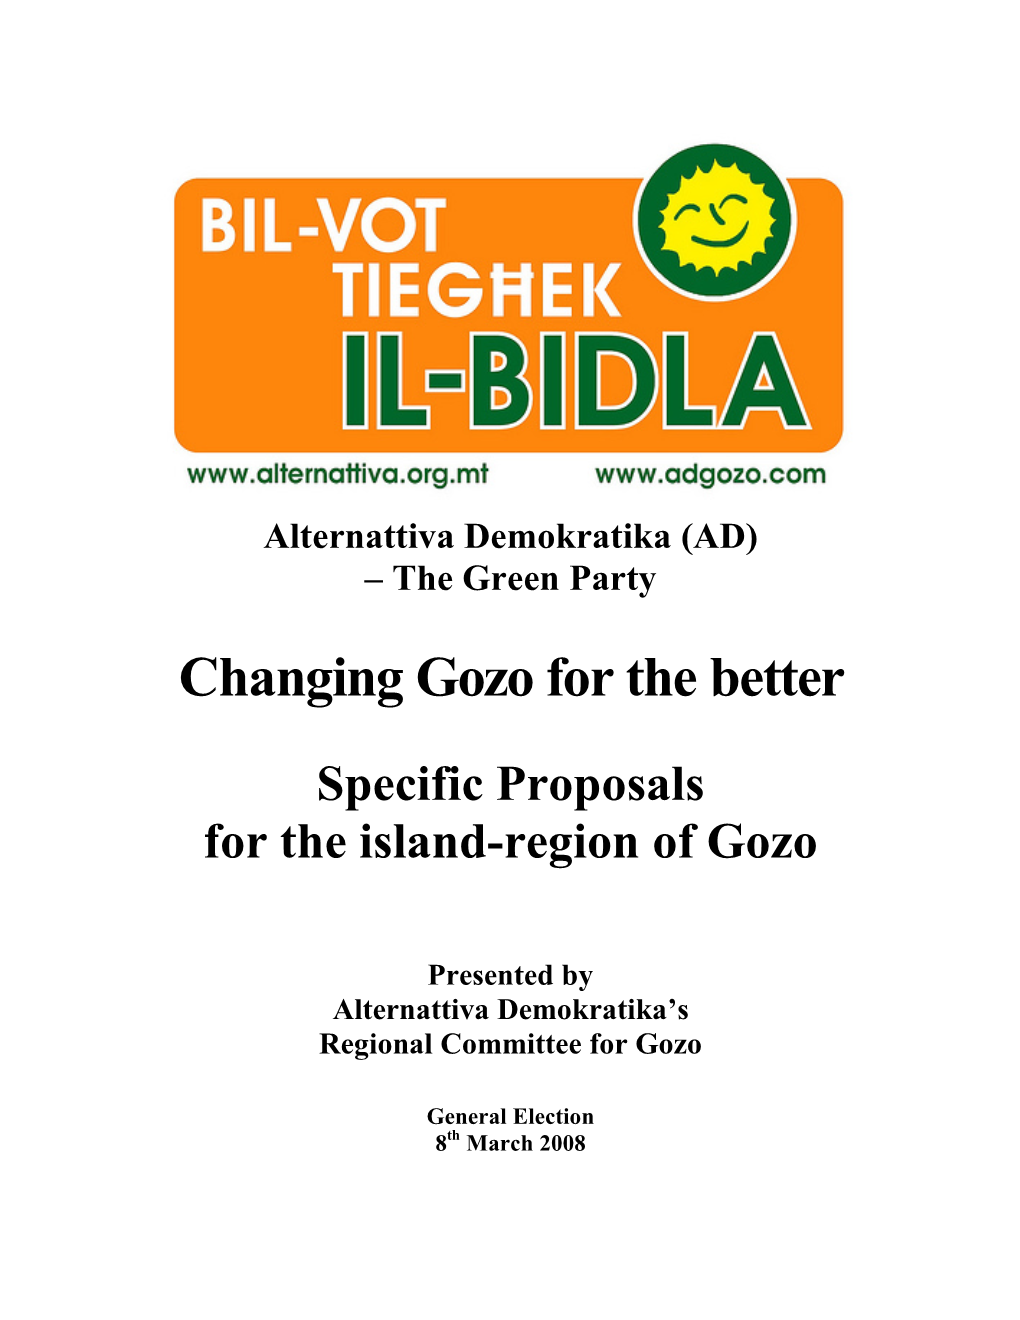 AD Proposals for Gozo General Election 2008